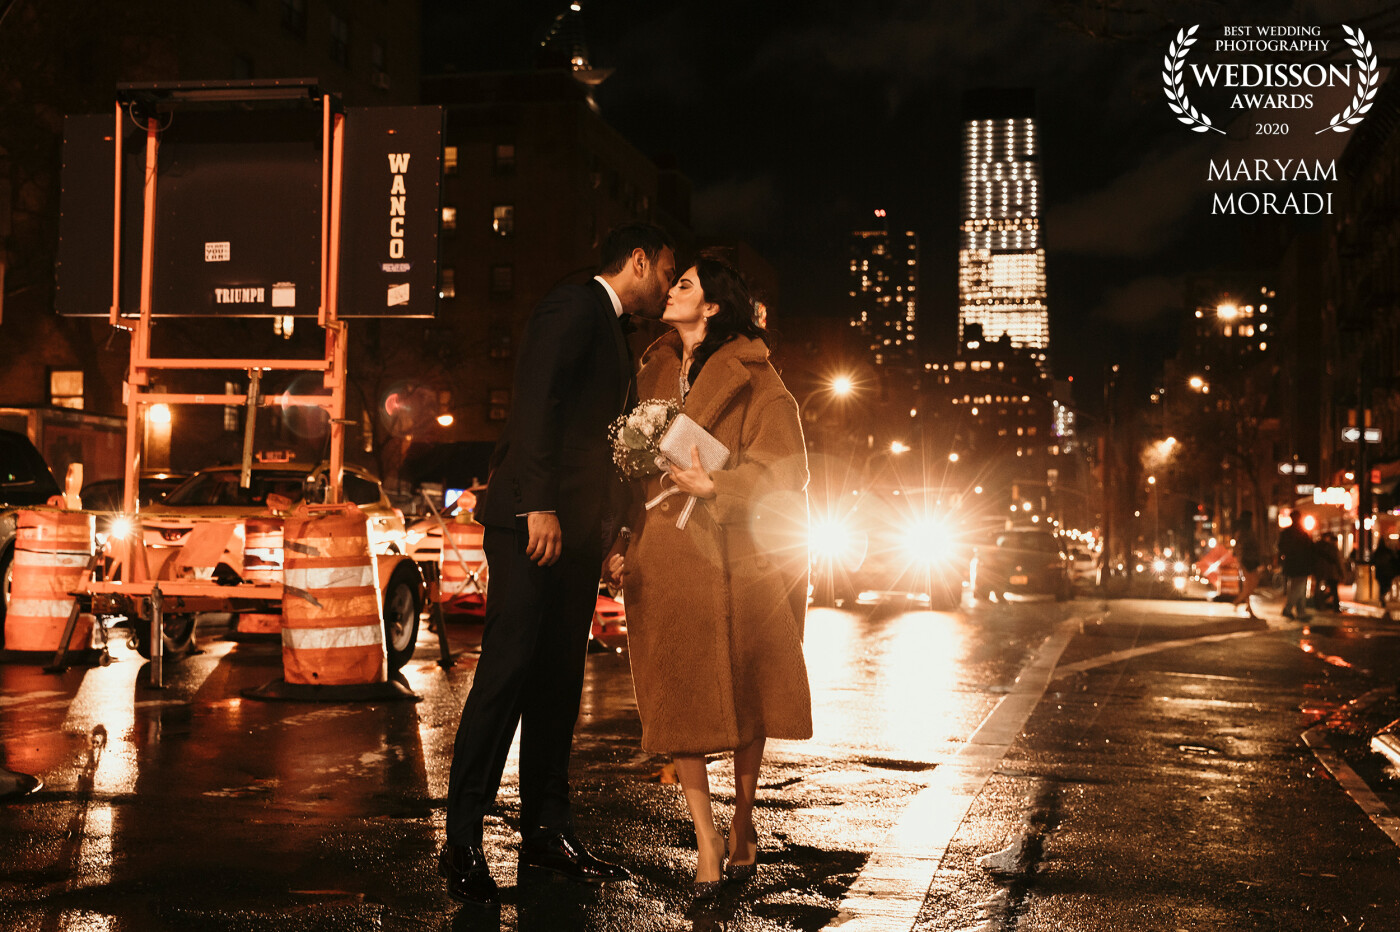 On this beautiful cold night in December, I photographed this cool couple when shares their love in the streets of New York City.<br />
@marymor_photography<br />
New York City, US